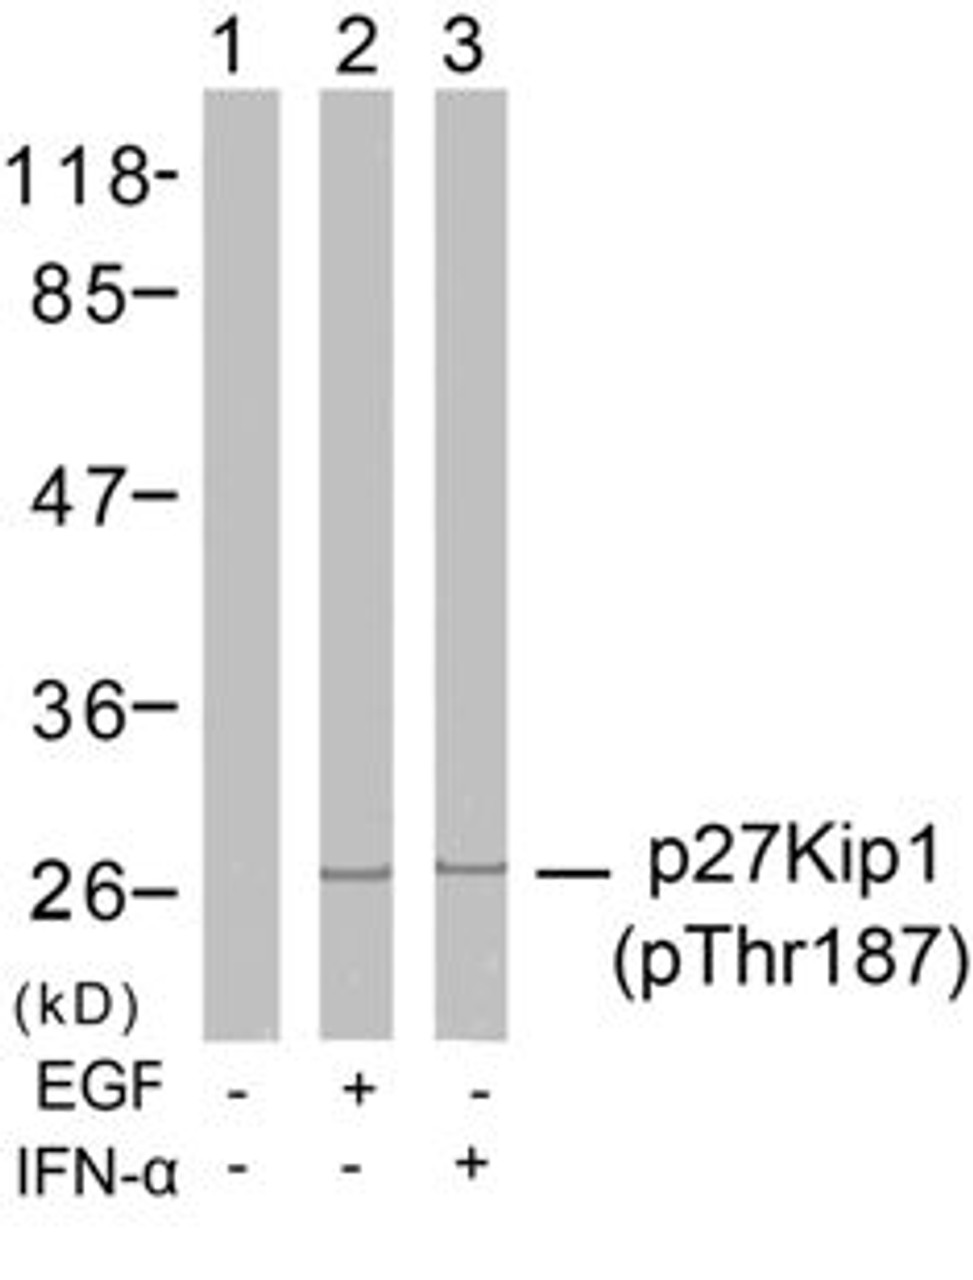 Western blot analysis of lysed extracts from HeLa cells untreated or treated with EGF, IFN-&#945; using p27Kip1 (Phospho-Thr187) .